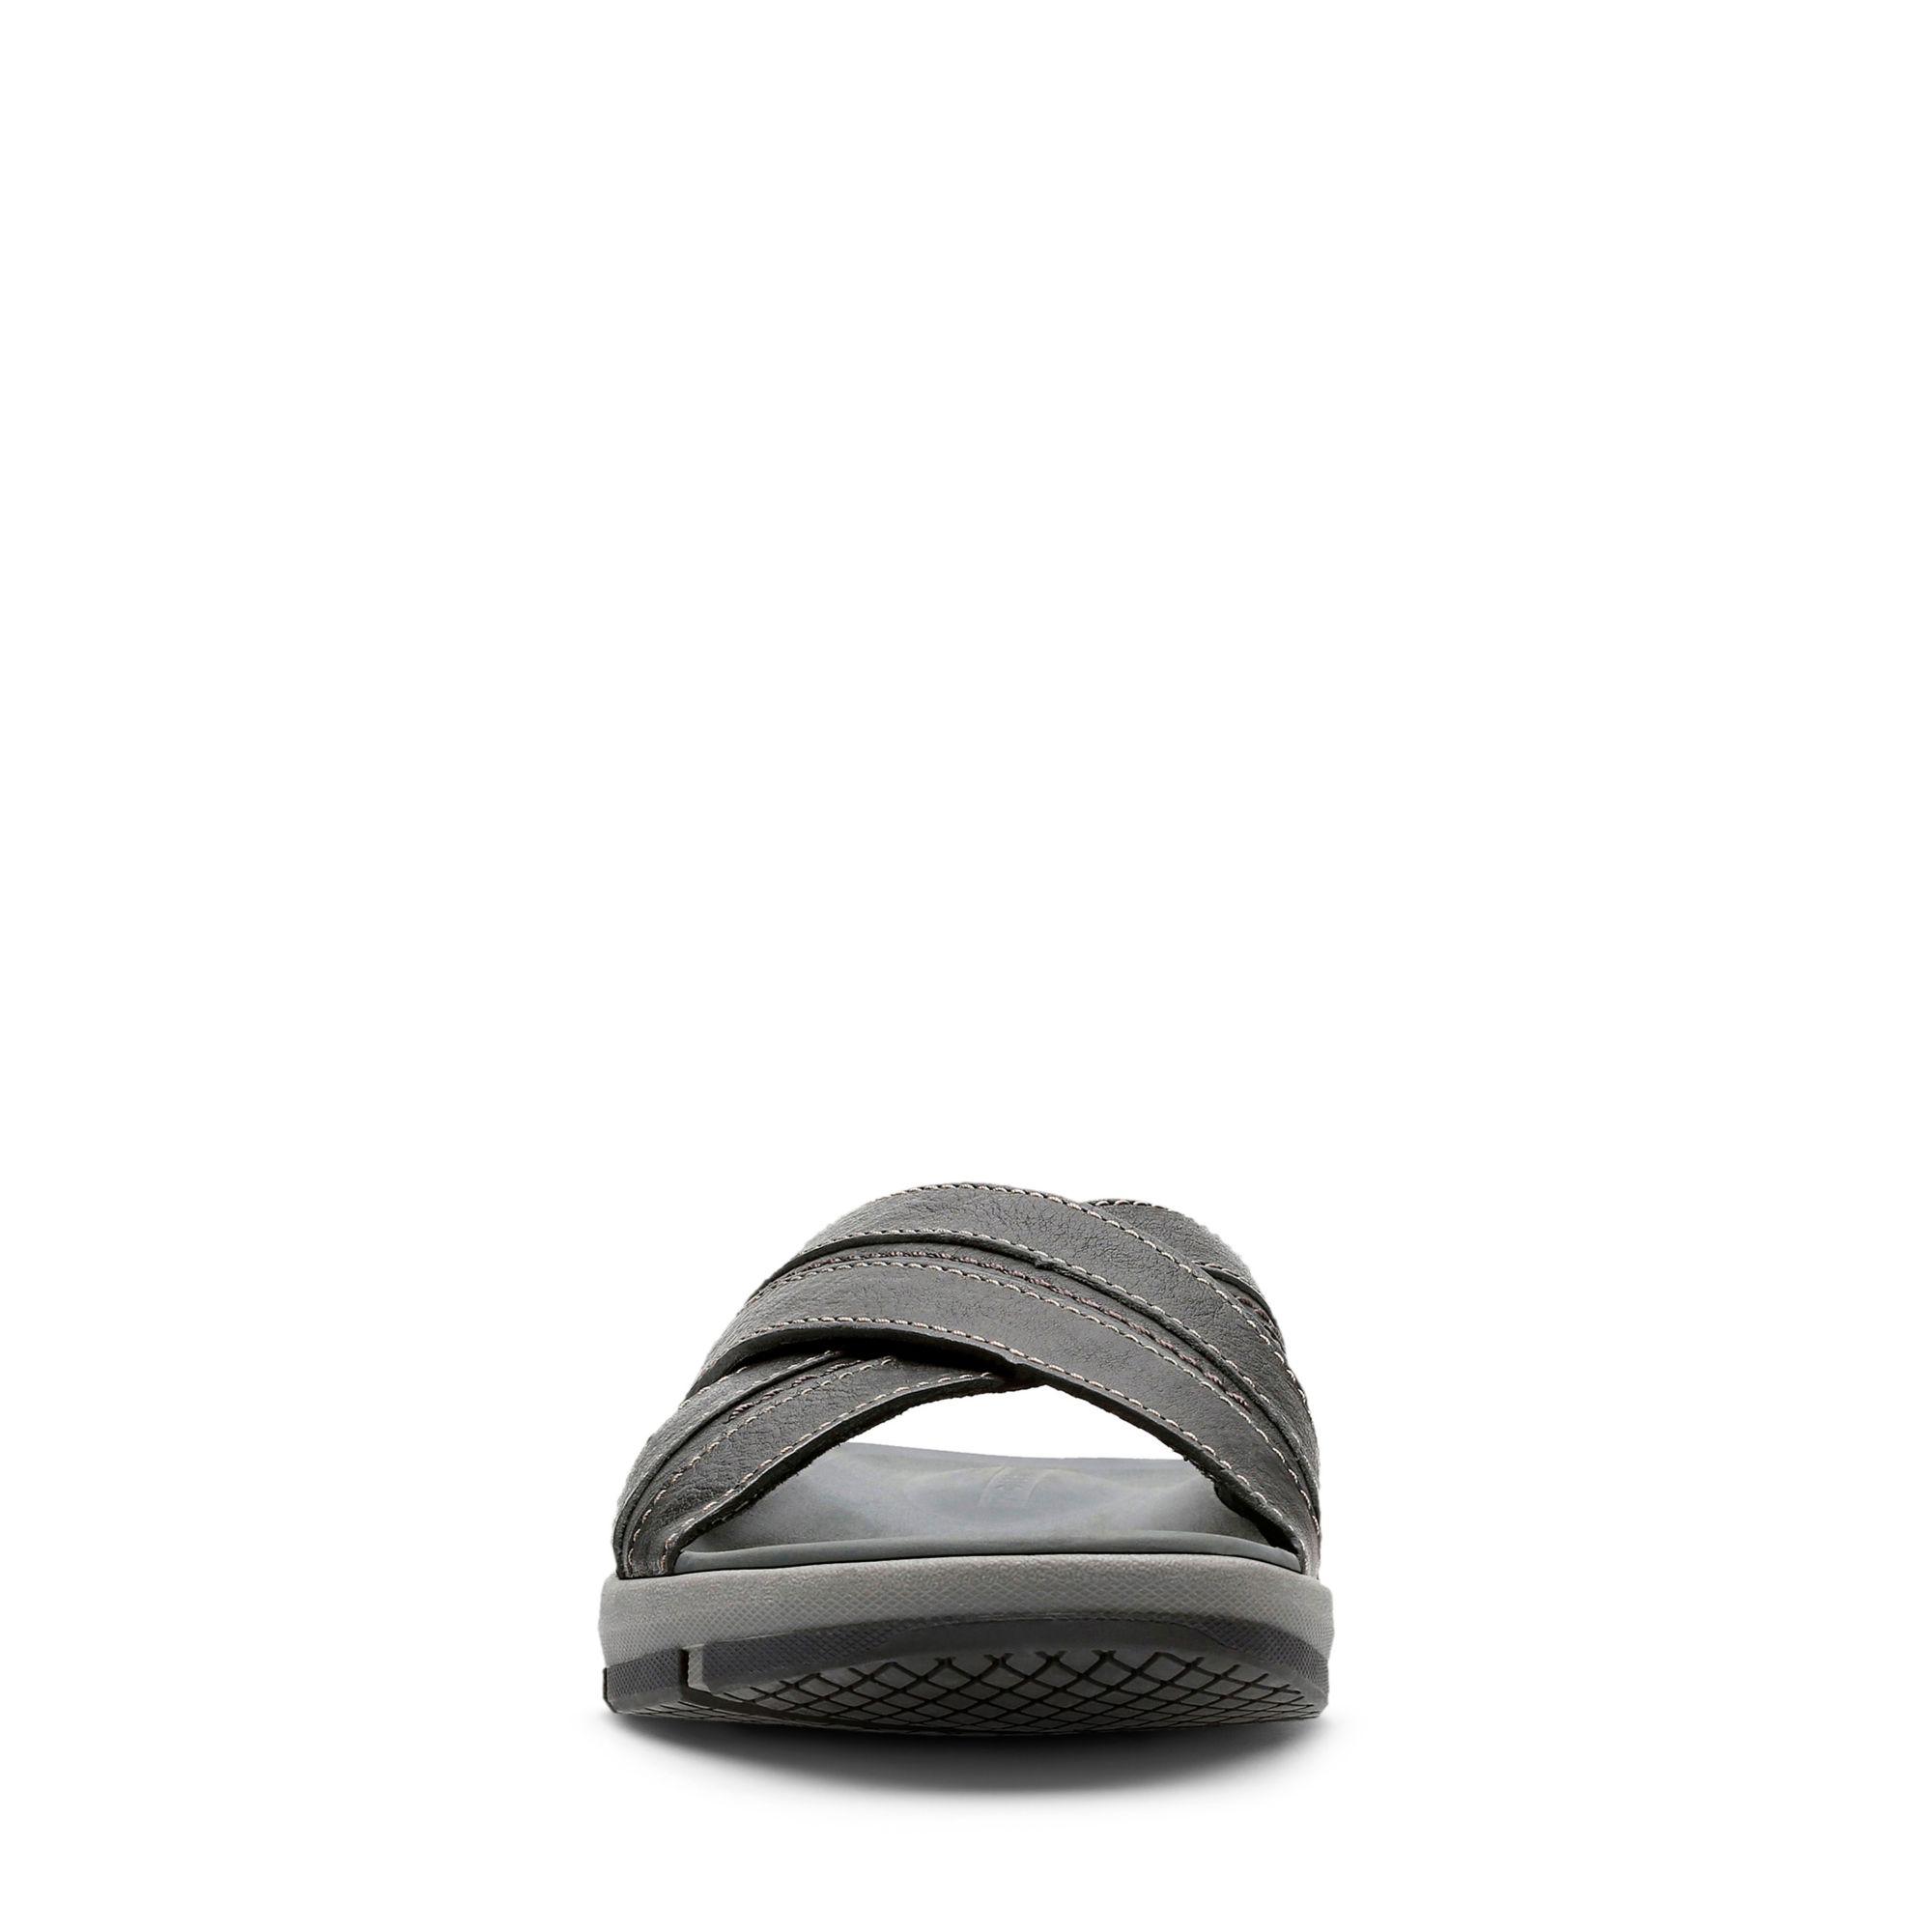 clarks brixby cross sandals